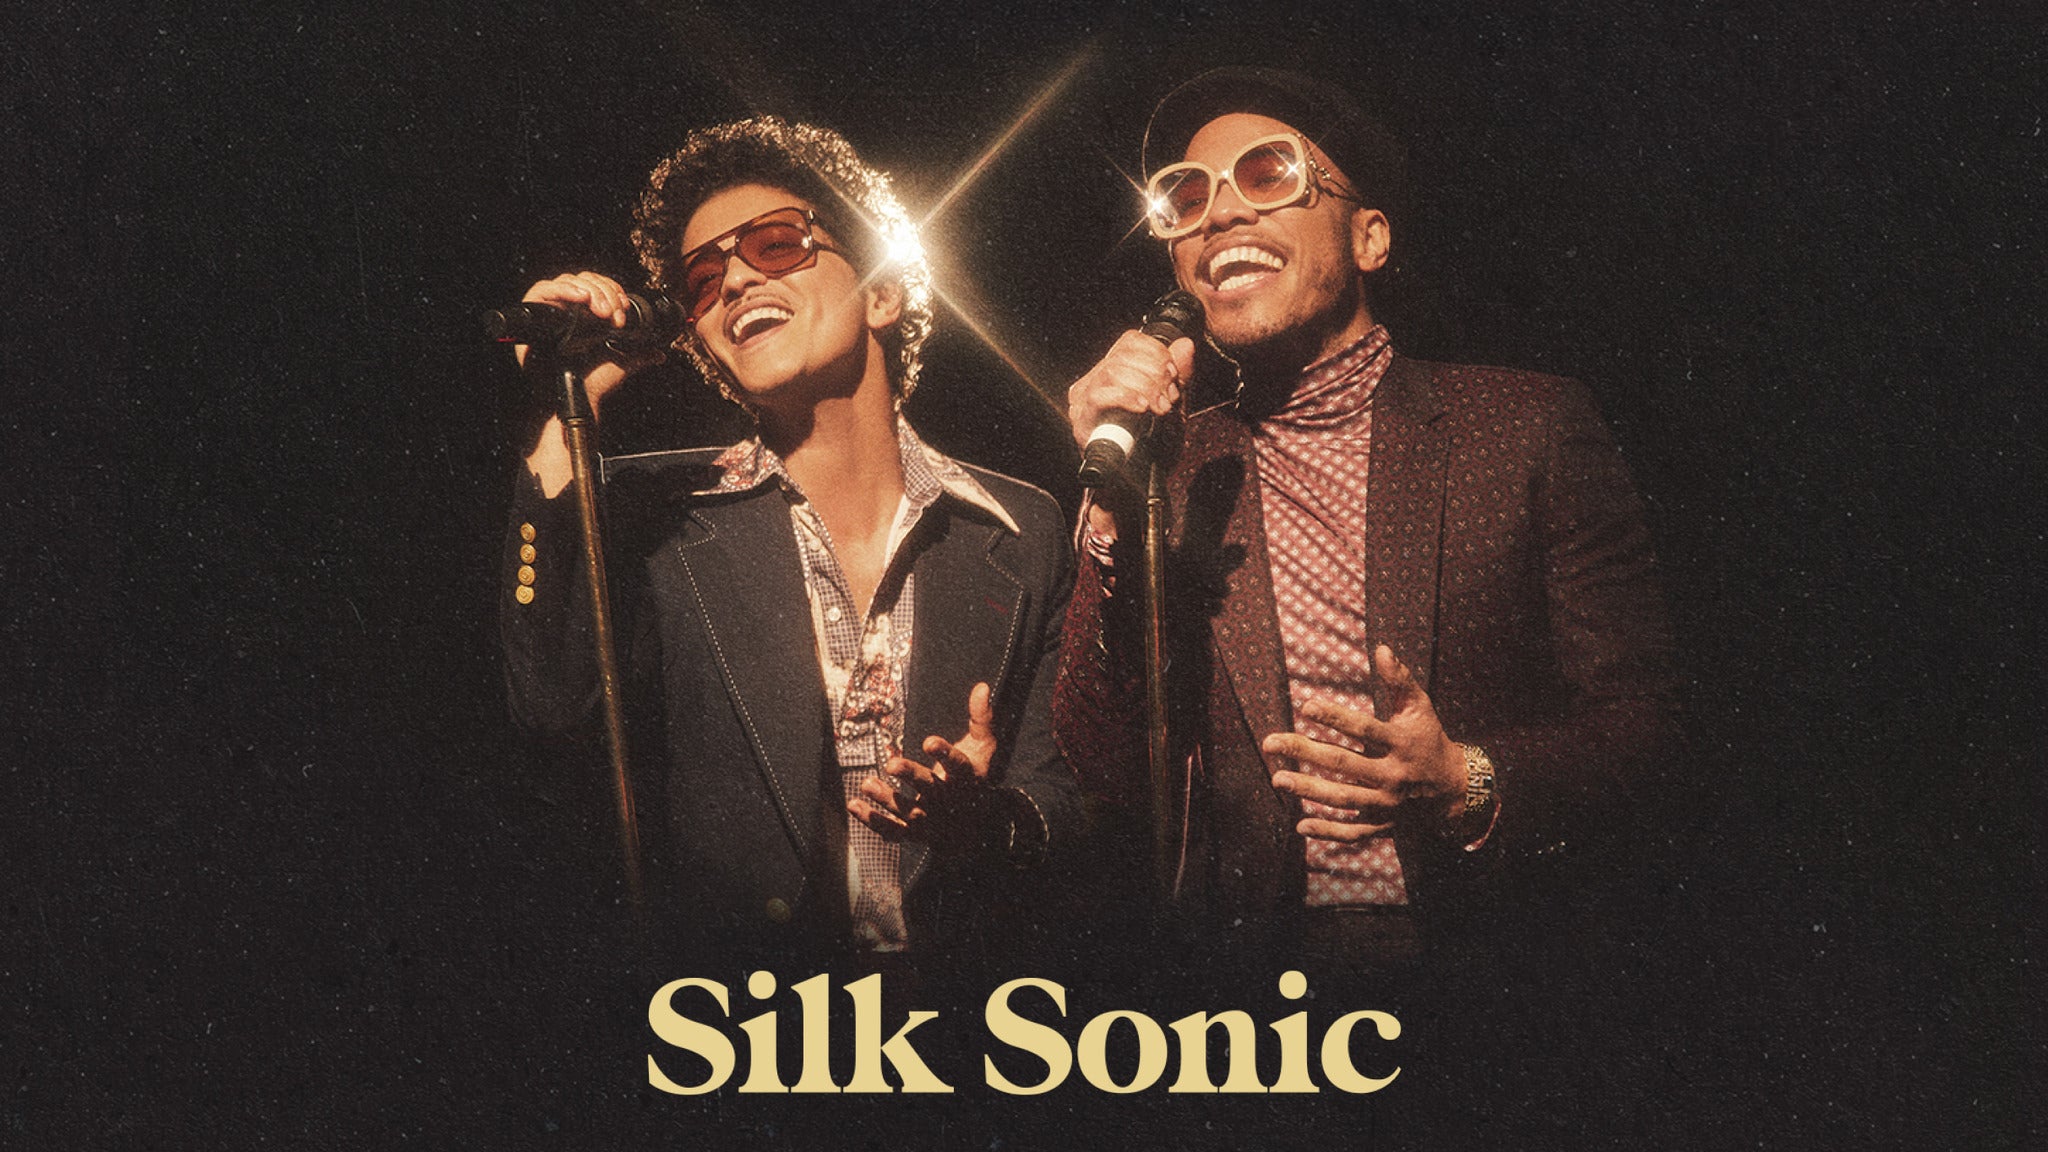 An Evening with Silk Sonic in Las Vegas promo photo for Live Nation presale offer code